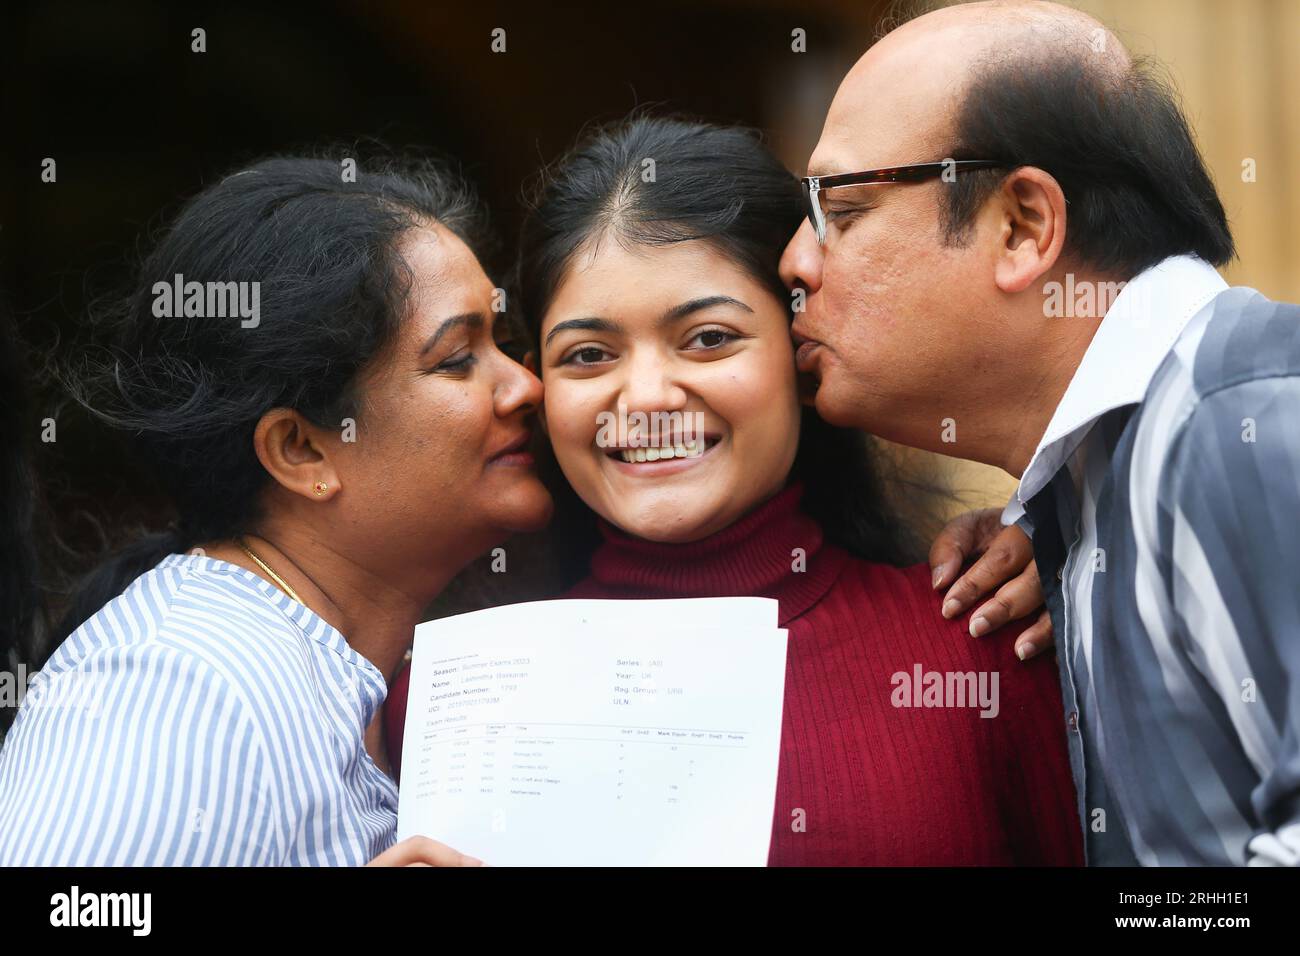 Birmingham, UK. 17th Aug, 2023. Students from King Edward VI High School for Girls, Edgbaston, Birmingham, celebrate their successful results in their A levels. KEHS Sports Scholar Lashmitha, who is part of GB Archery and joined KEHS at Sixth Form, achieved 4 A*s in Art, Biology, Chemistry and Maths and an A in the EPQ, and will now read Medicine at the University of Cambridge. She has been awarded a prestigious OCR bursary, of which only 10 are awarded. Credit: Peter Lopeman/Alamy Live News Stock Photo